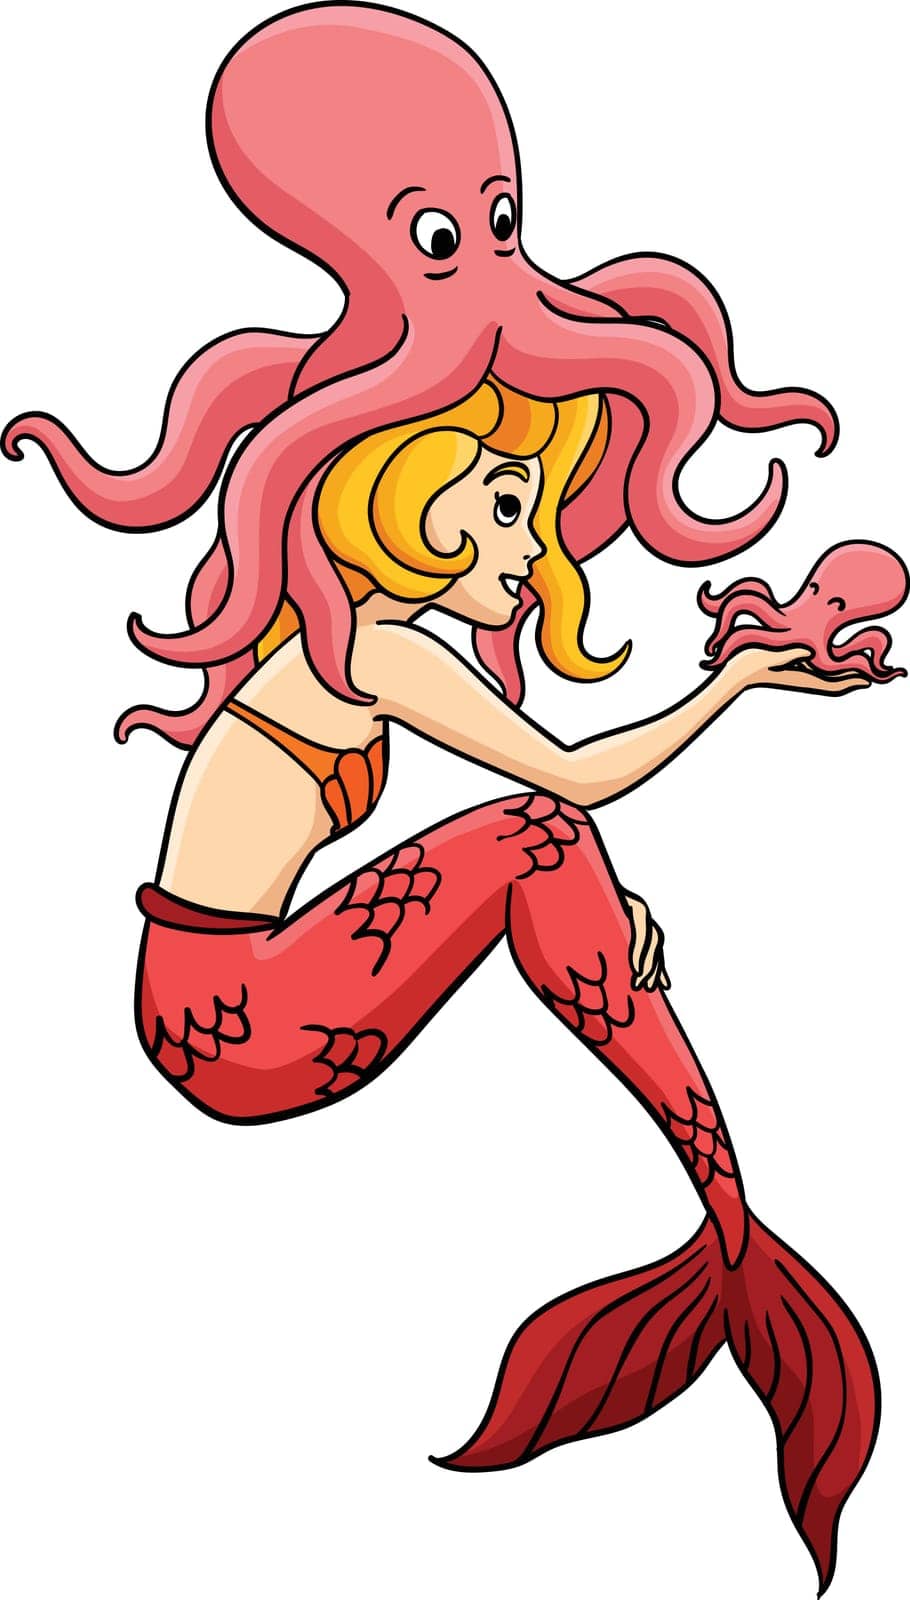 This cartoon clipart shows a Mermaid with an Octopus illustration.